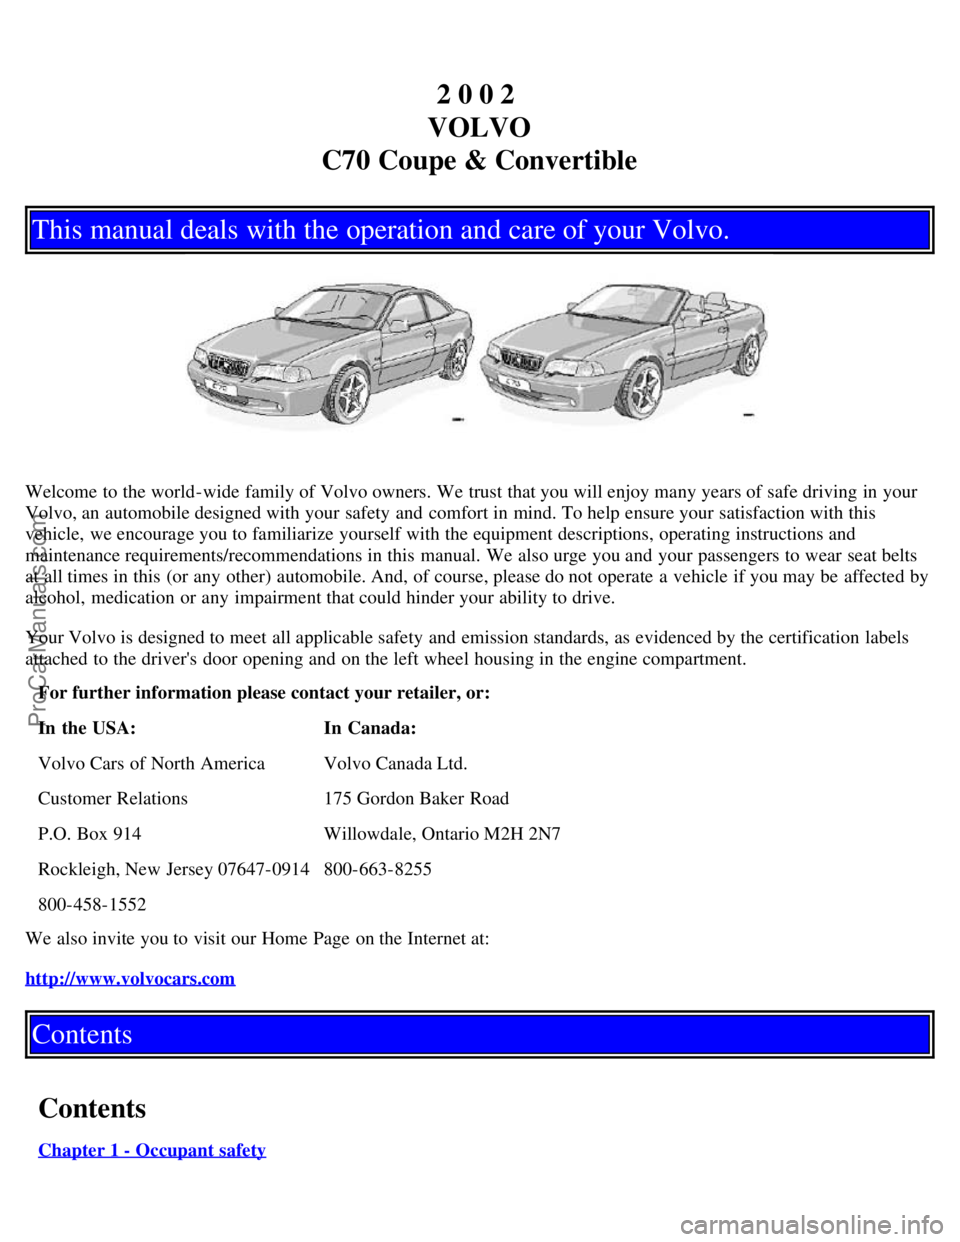 VOLVO C70 2002  Owners Manual 2 0 0 2 
VOLVO
C70 Coupe & Convertible
This manual deals with the operation and care of your Volvo.
Welcome to the world-wide  family of Volvo owners. We trust that you will enjoy many years of safe d